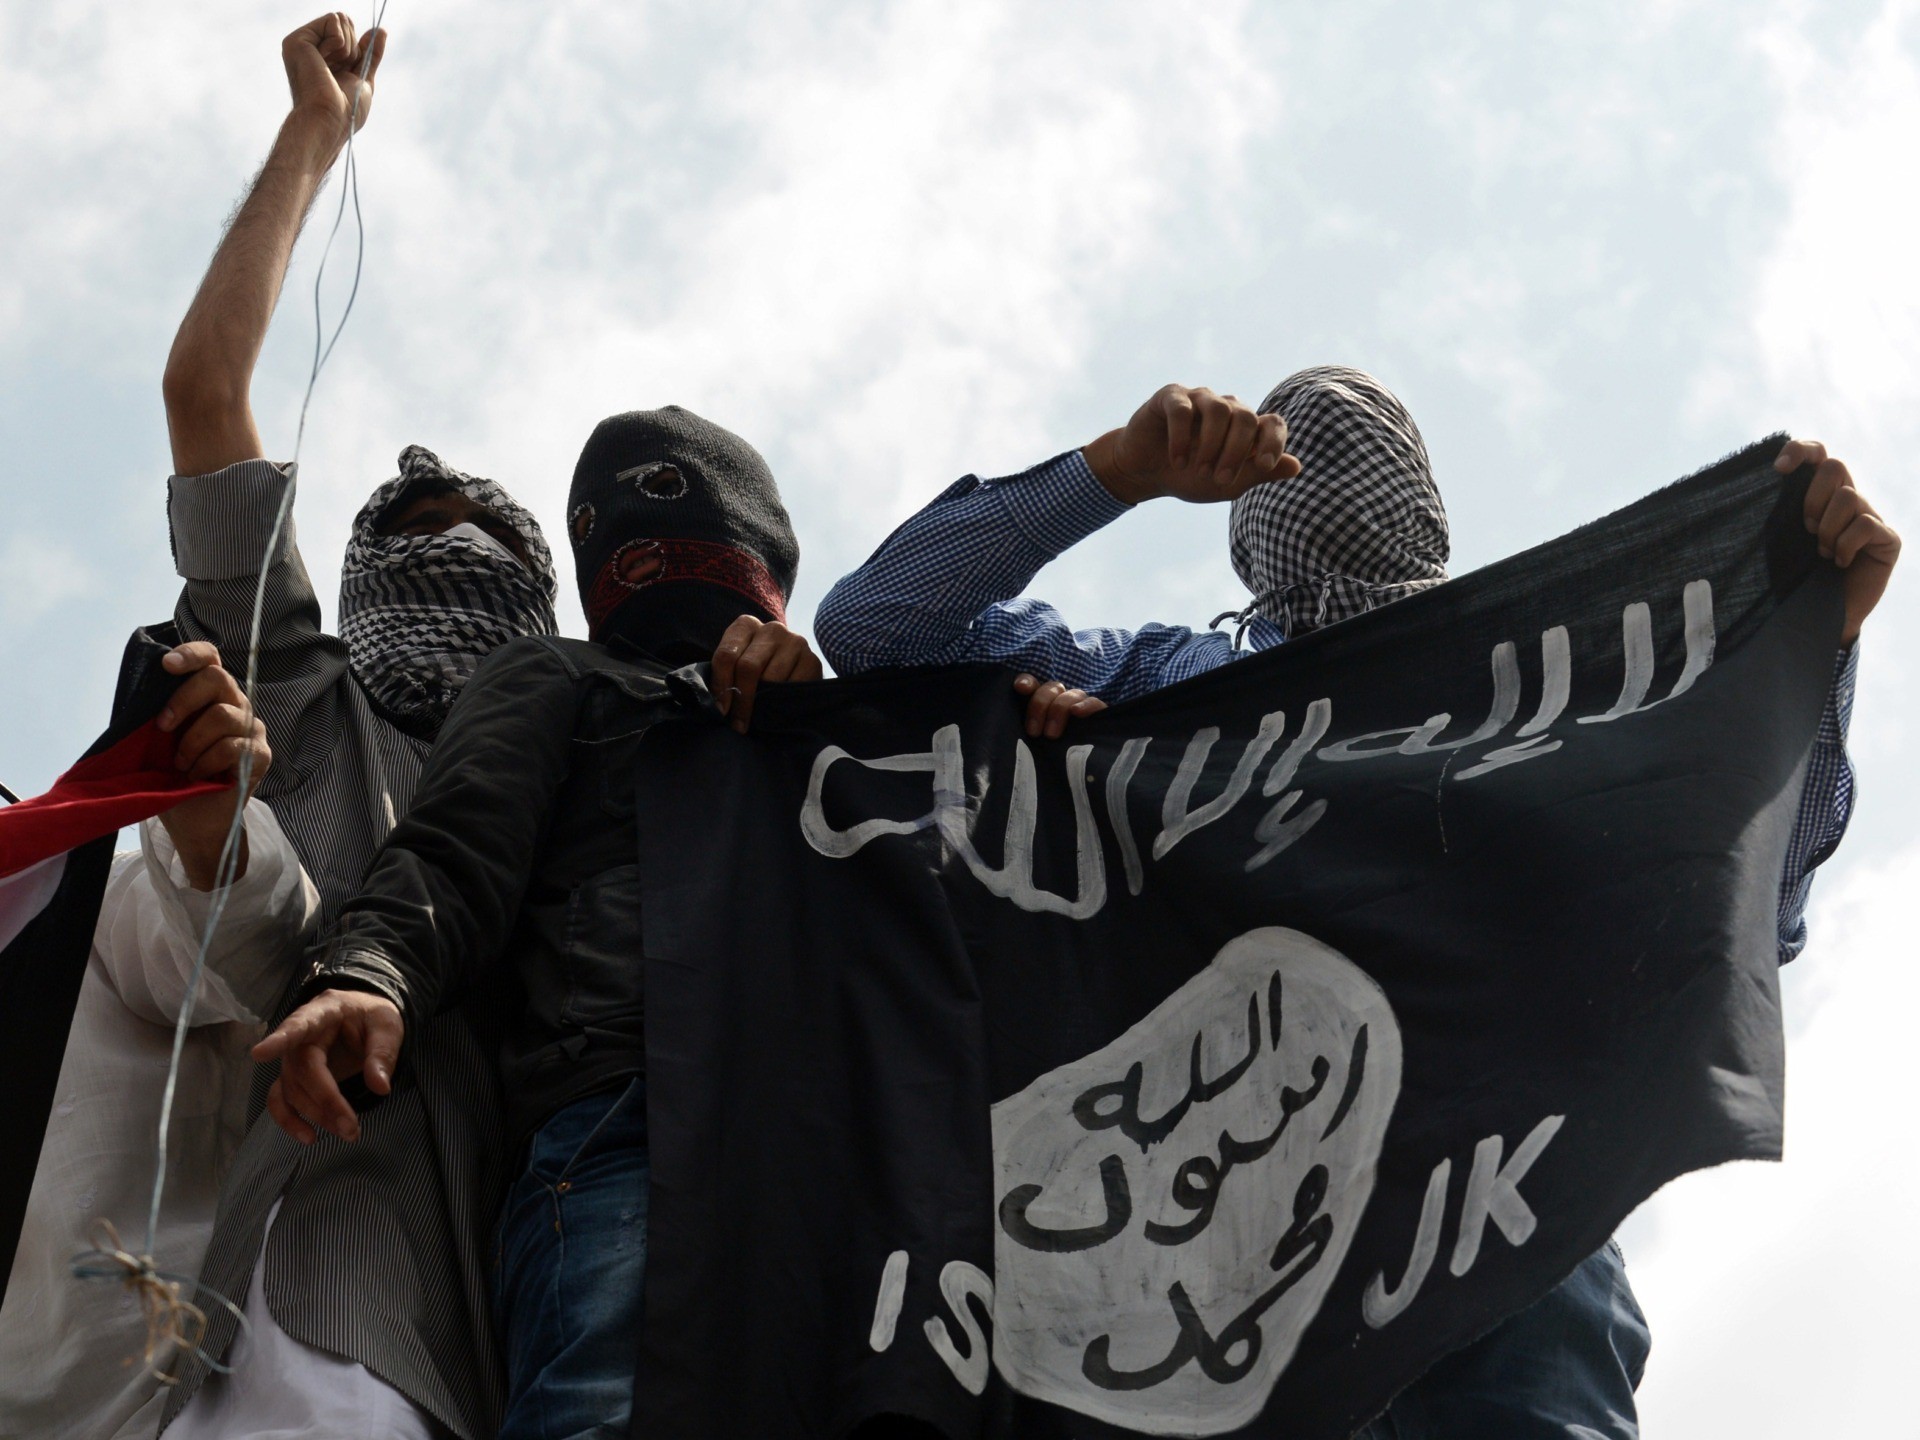 Kashmiri demonstrators hold up a flag of the Islamic State of Iraq and the Levant (ISIL) during a demonstration against Israeli military operations in Gaza, in downtown Srinagar on July 18, 2014. The death toll in Gaza hit 265 as Israel pressed a ground offensive on the 11th day of an assault aimed at stamping out rocket fire, medics said. AFP PHOTO/Tauseef MUSTAFA (Photo credit should read TAUSEEF MUSTAFA/AFP via Getty Images)